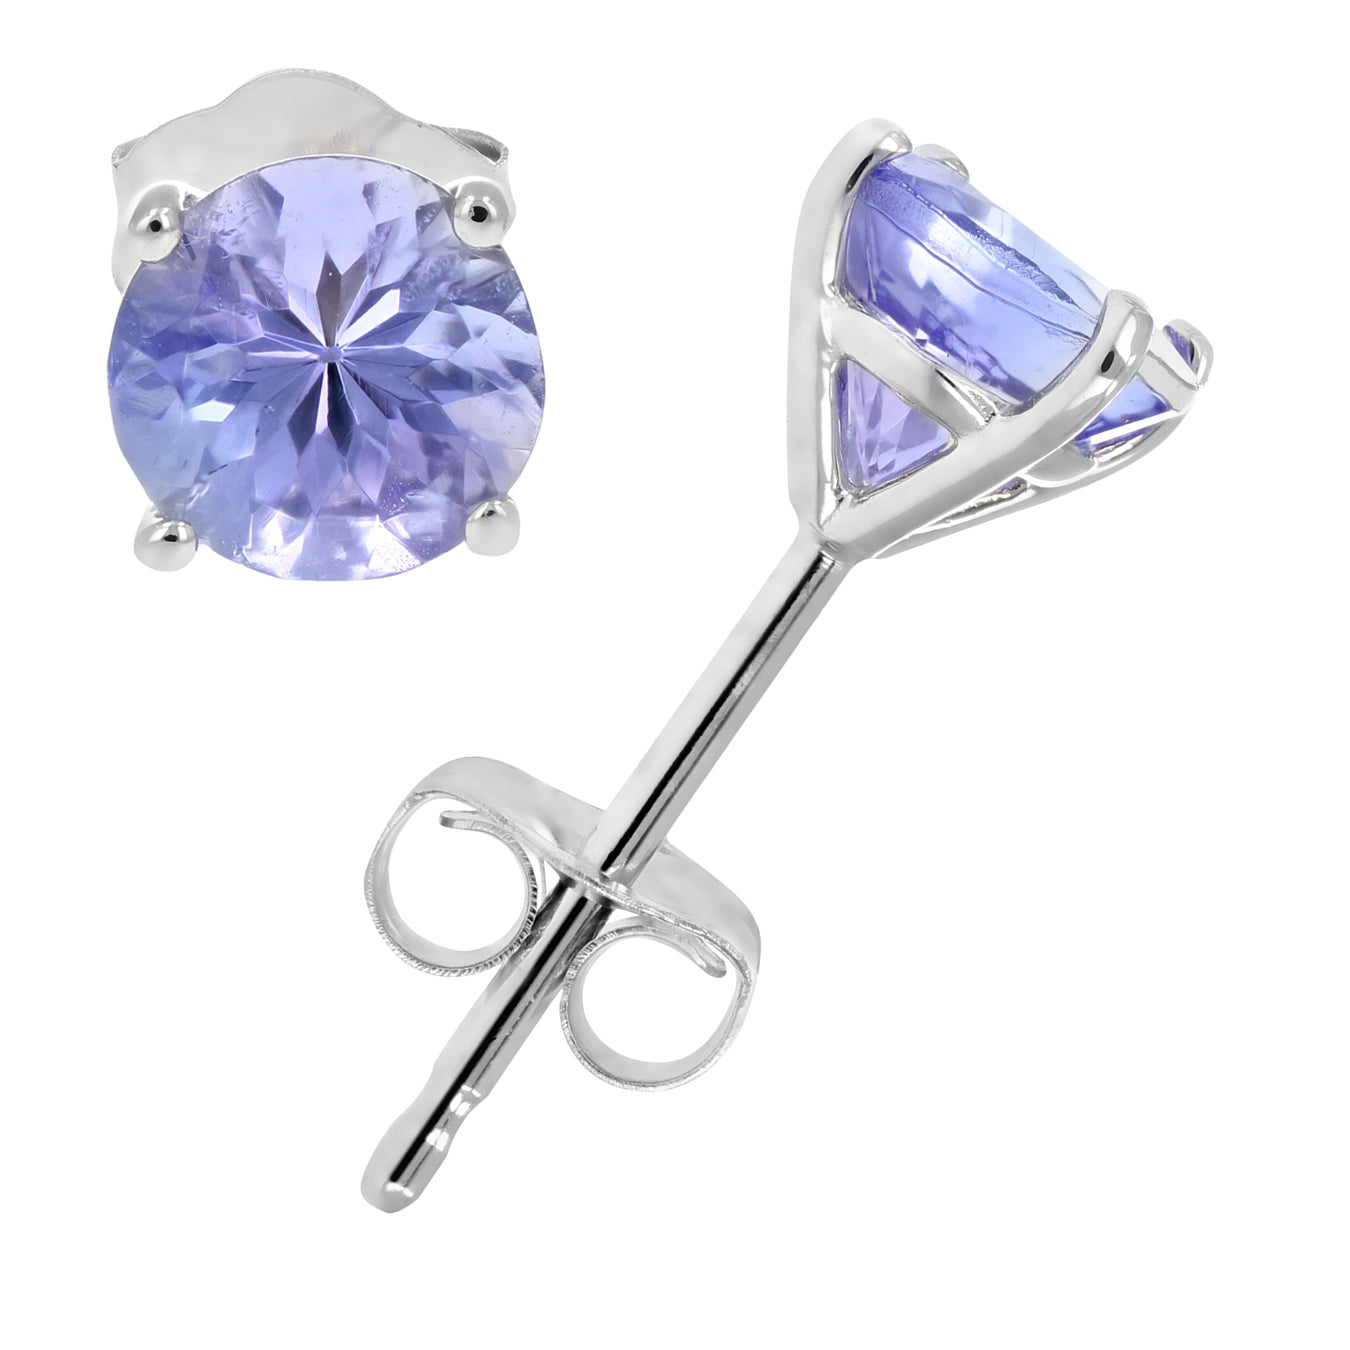 3/4 cttw Tanzanite Stud Earrings 14K White Gold 4 Prong Round Martini with Push Backs December Birthstone